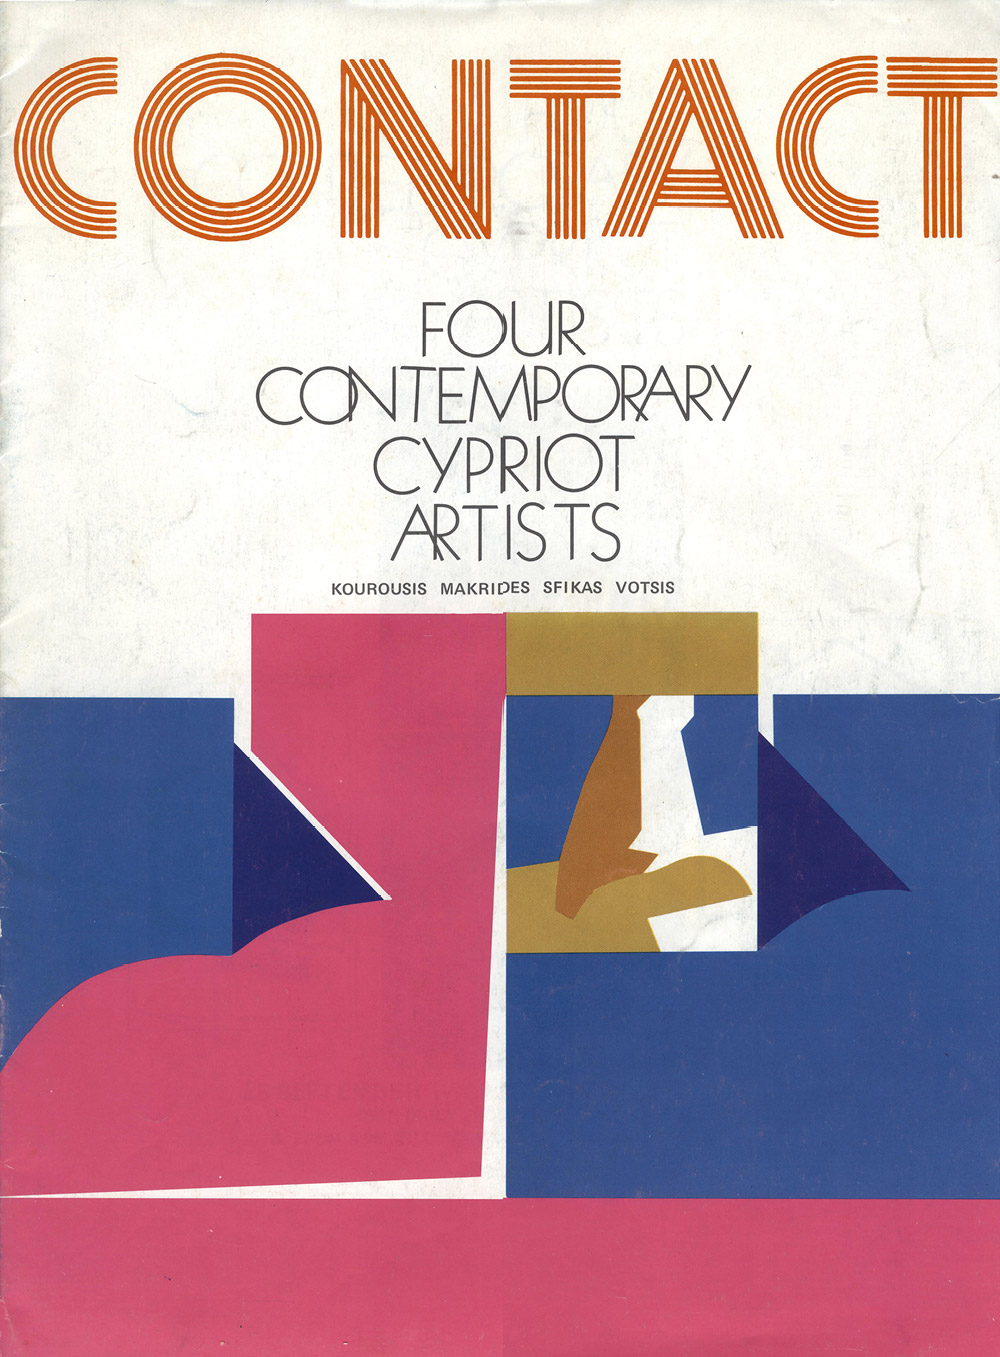 Magazine/review, Four Contemporary Cypriot Artists Exhibition at Contact Art Gallery, 28 September 1972, published by Contact Art Gallery (3). Courtesy Waddah Faris